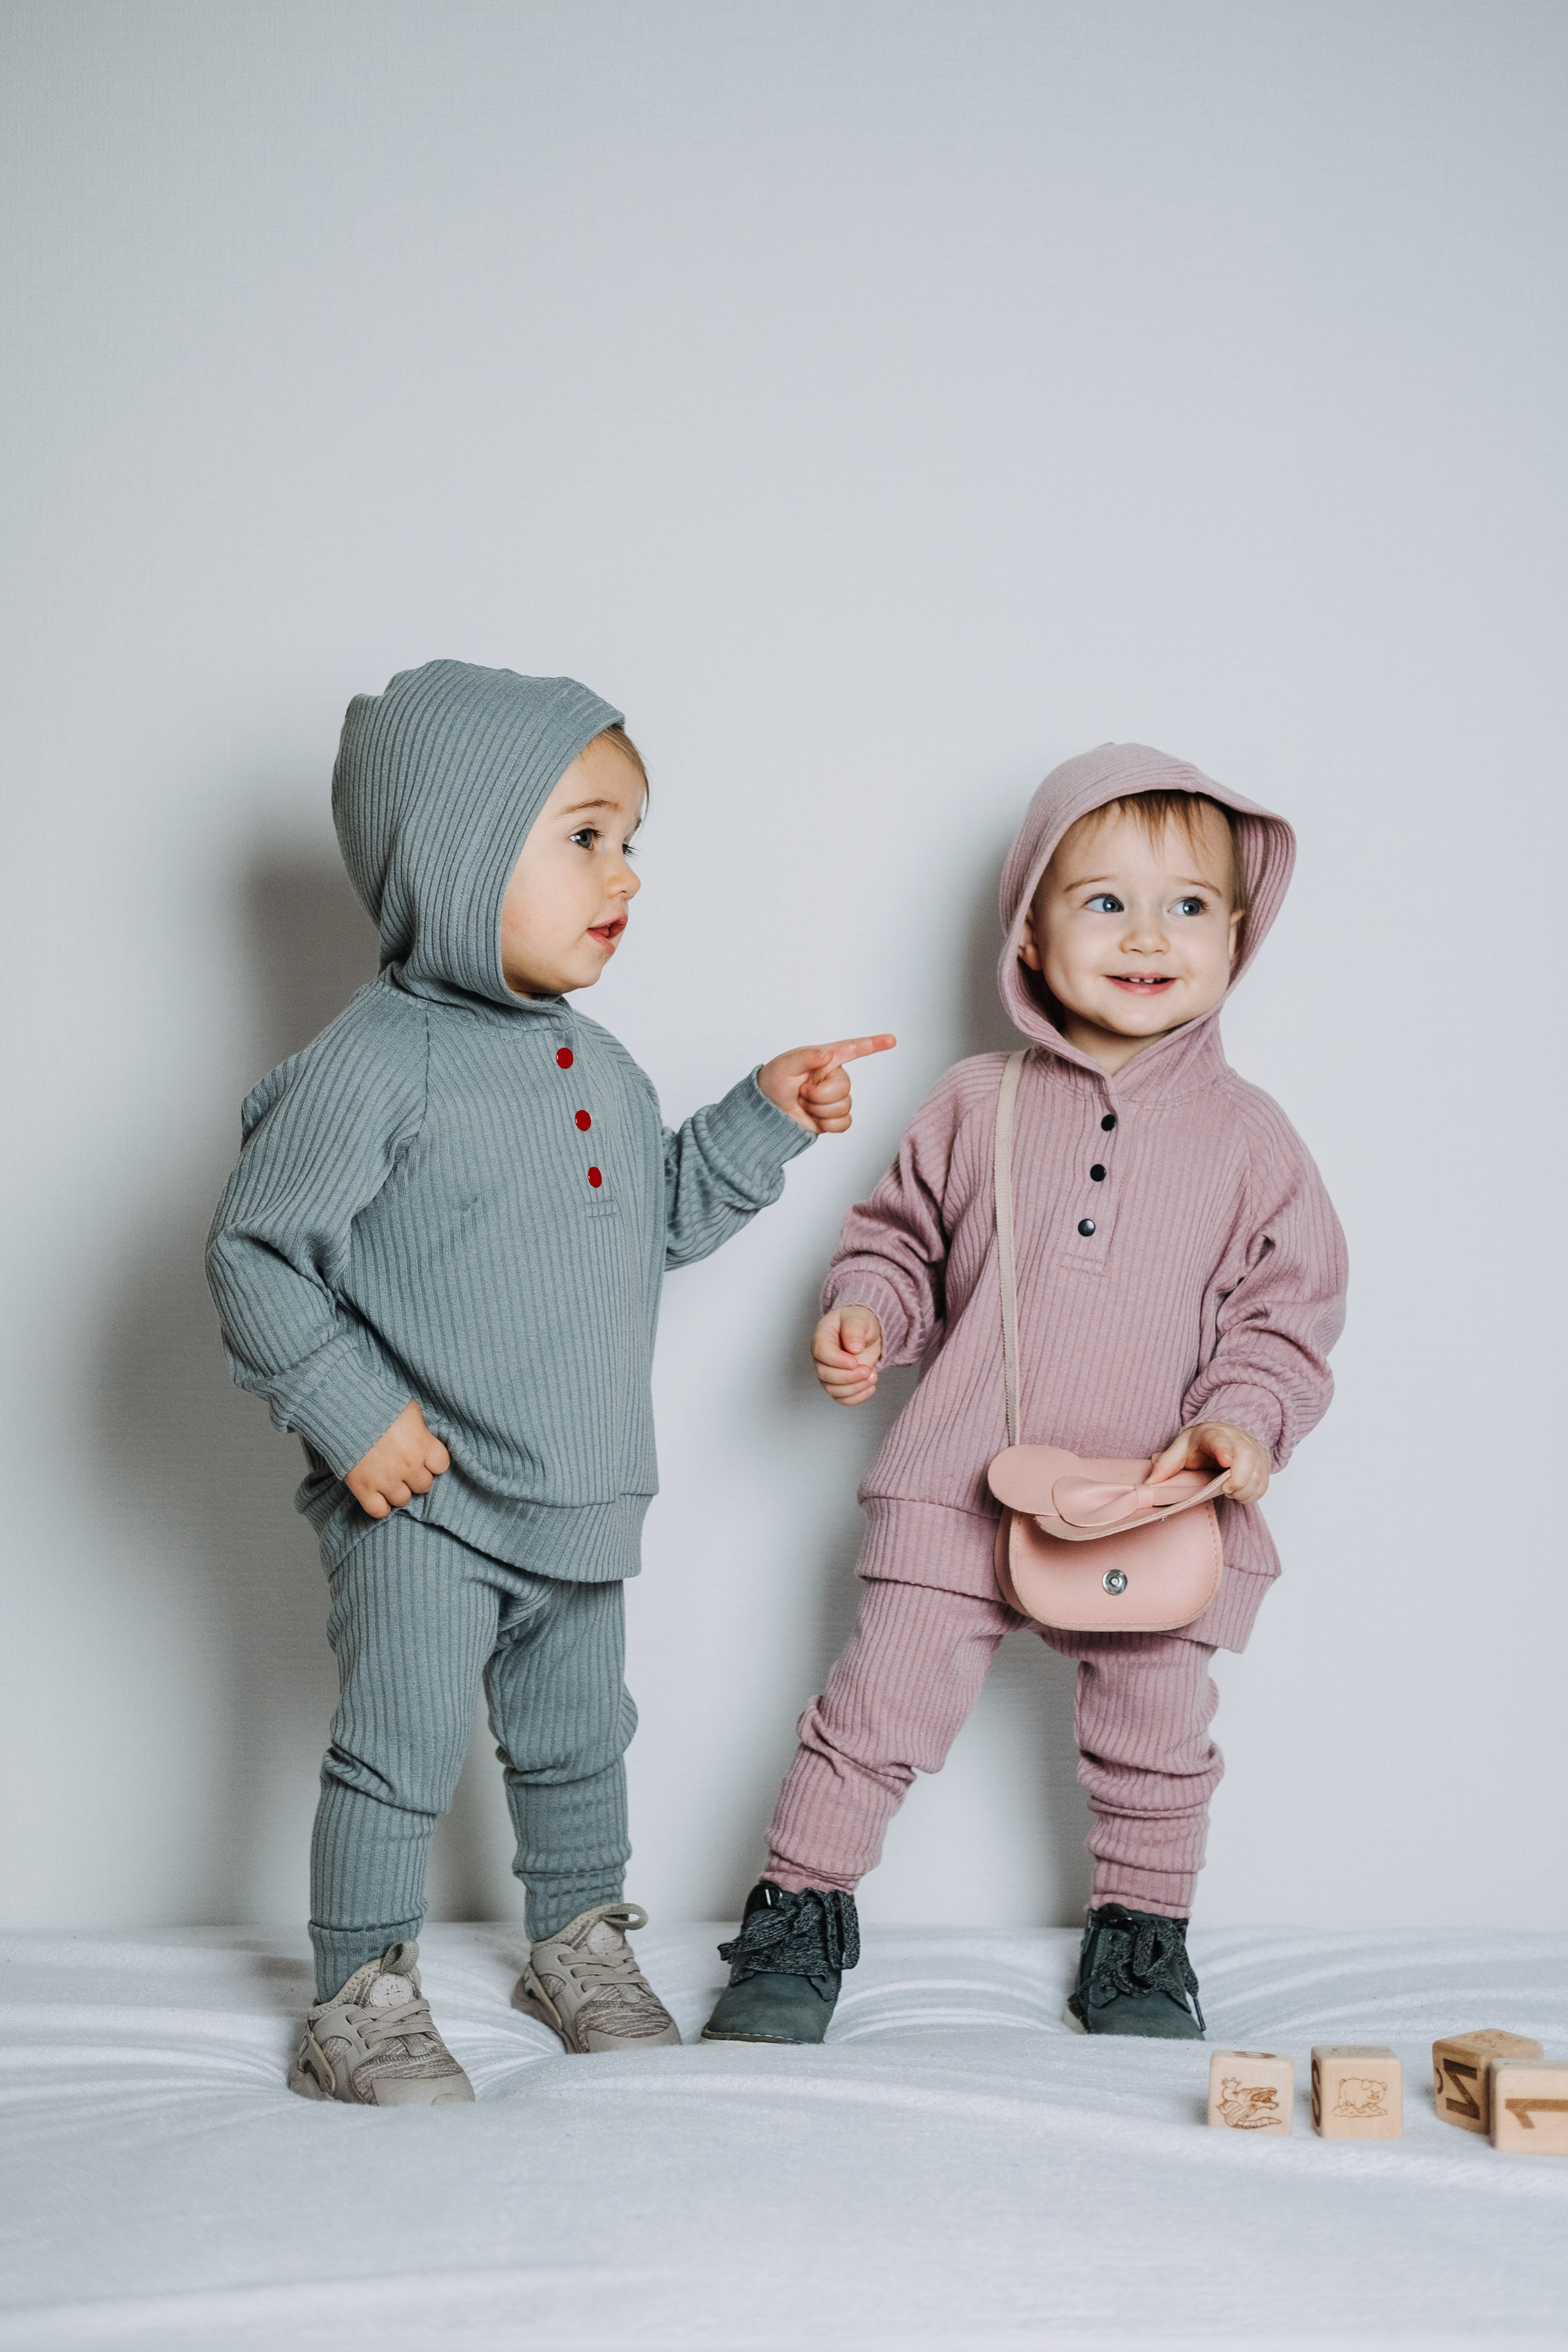 Baby fashion. Unisex gender neutral clothes for babies. Two